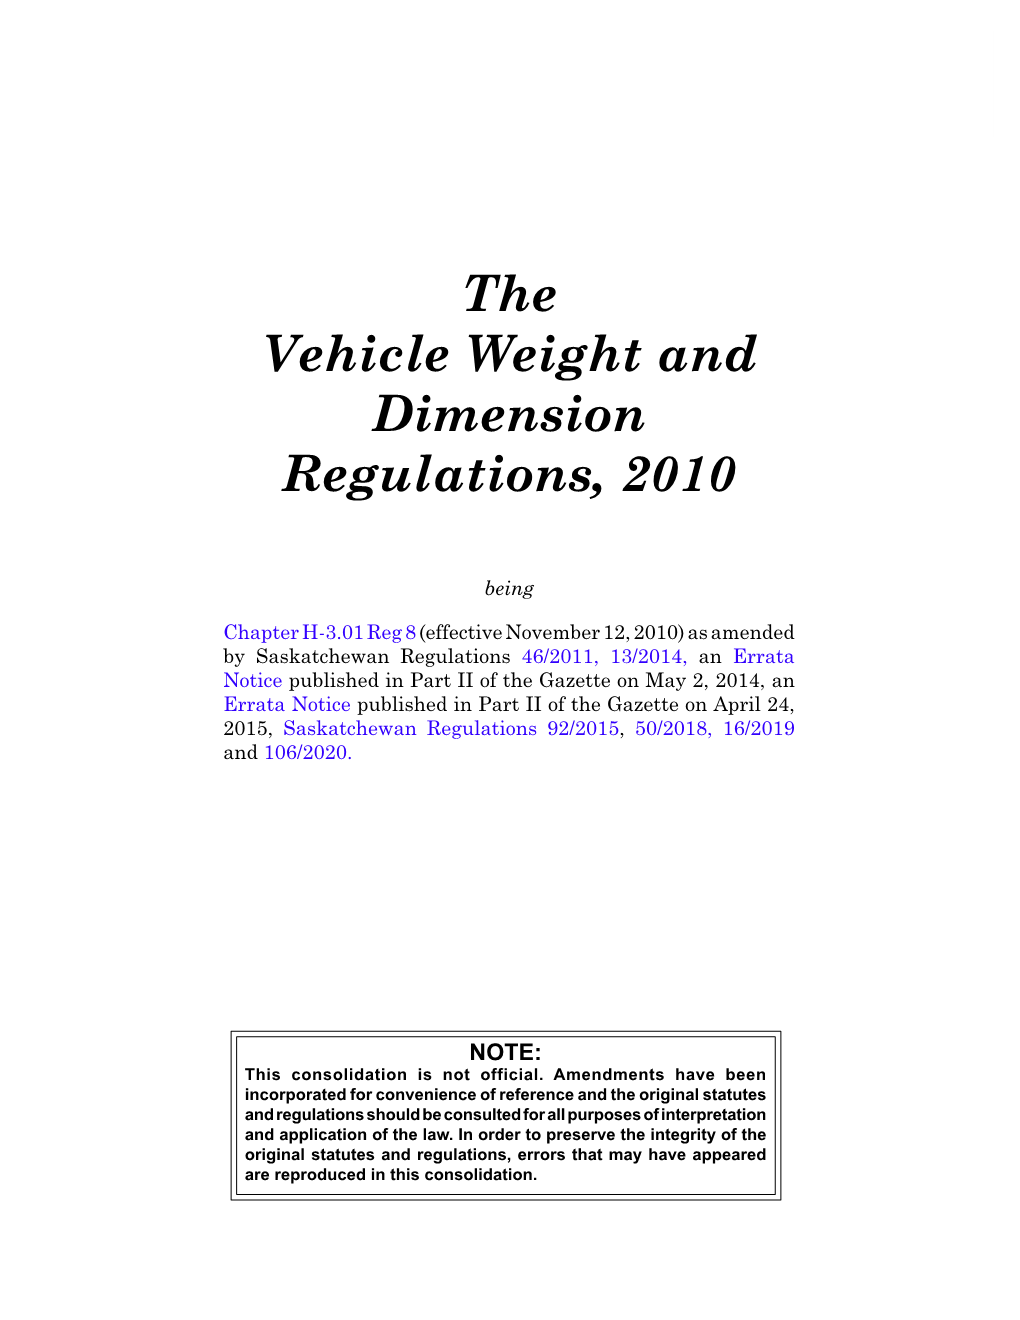 Vehicle Weight and Dimension Regulations, 2010